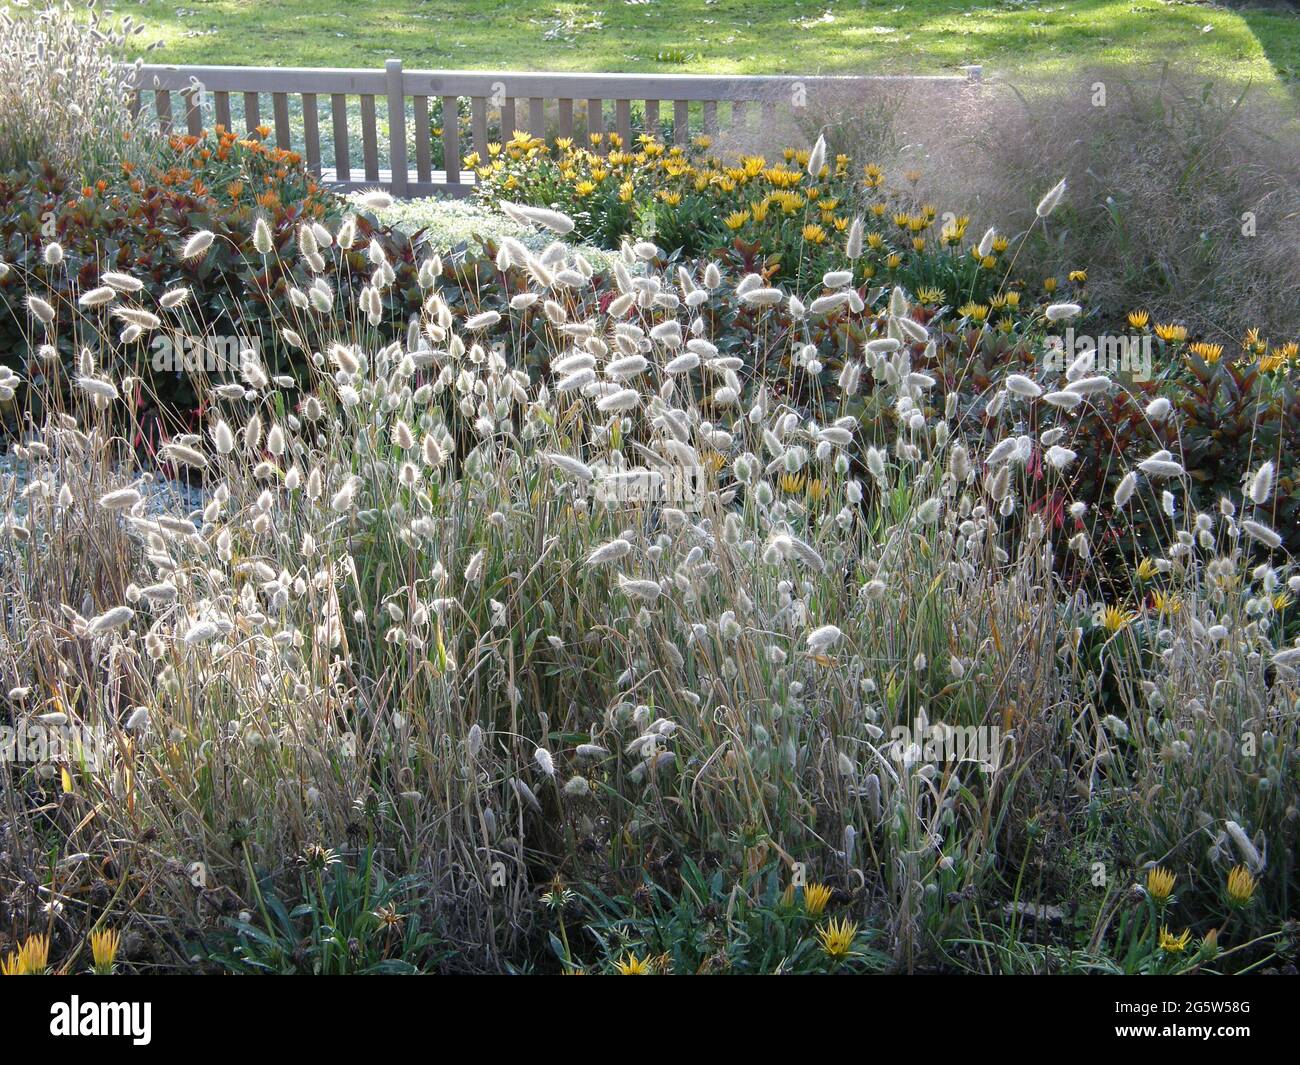 Hare's tail grass (Lagurus ovatus) blooms in a garden flower bed with other annuals behind a bench  in October Stock Photo